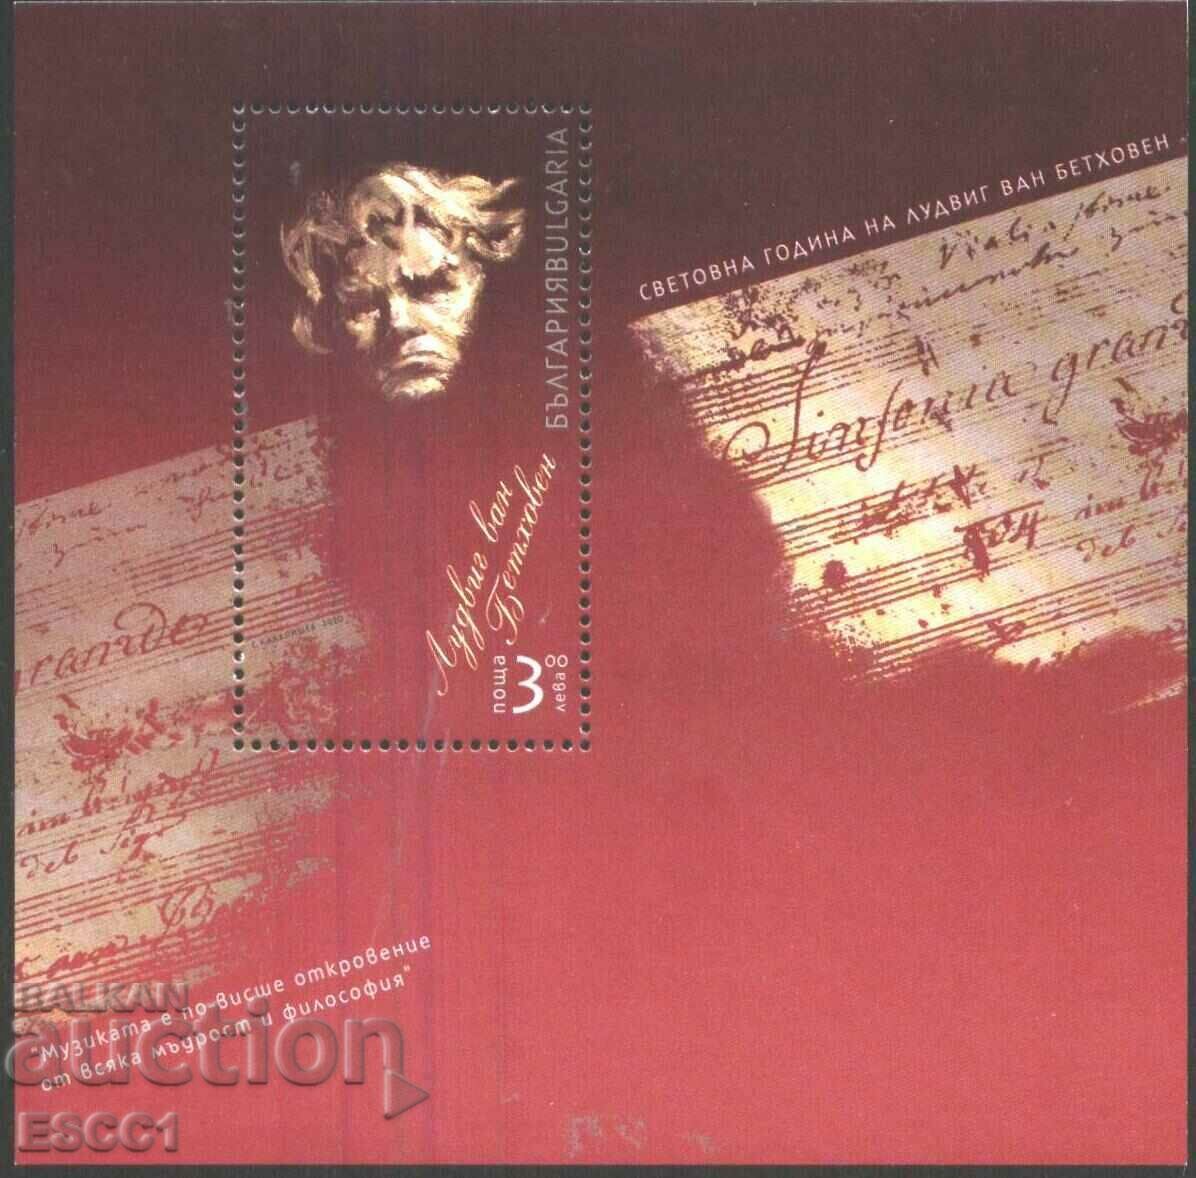 Pure block Music Beethoven 2020 from Bulgaria